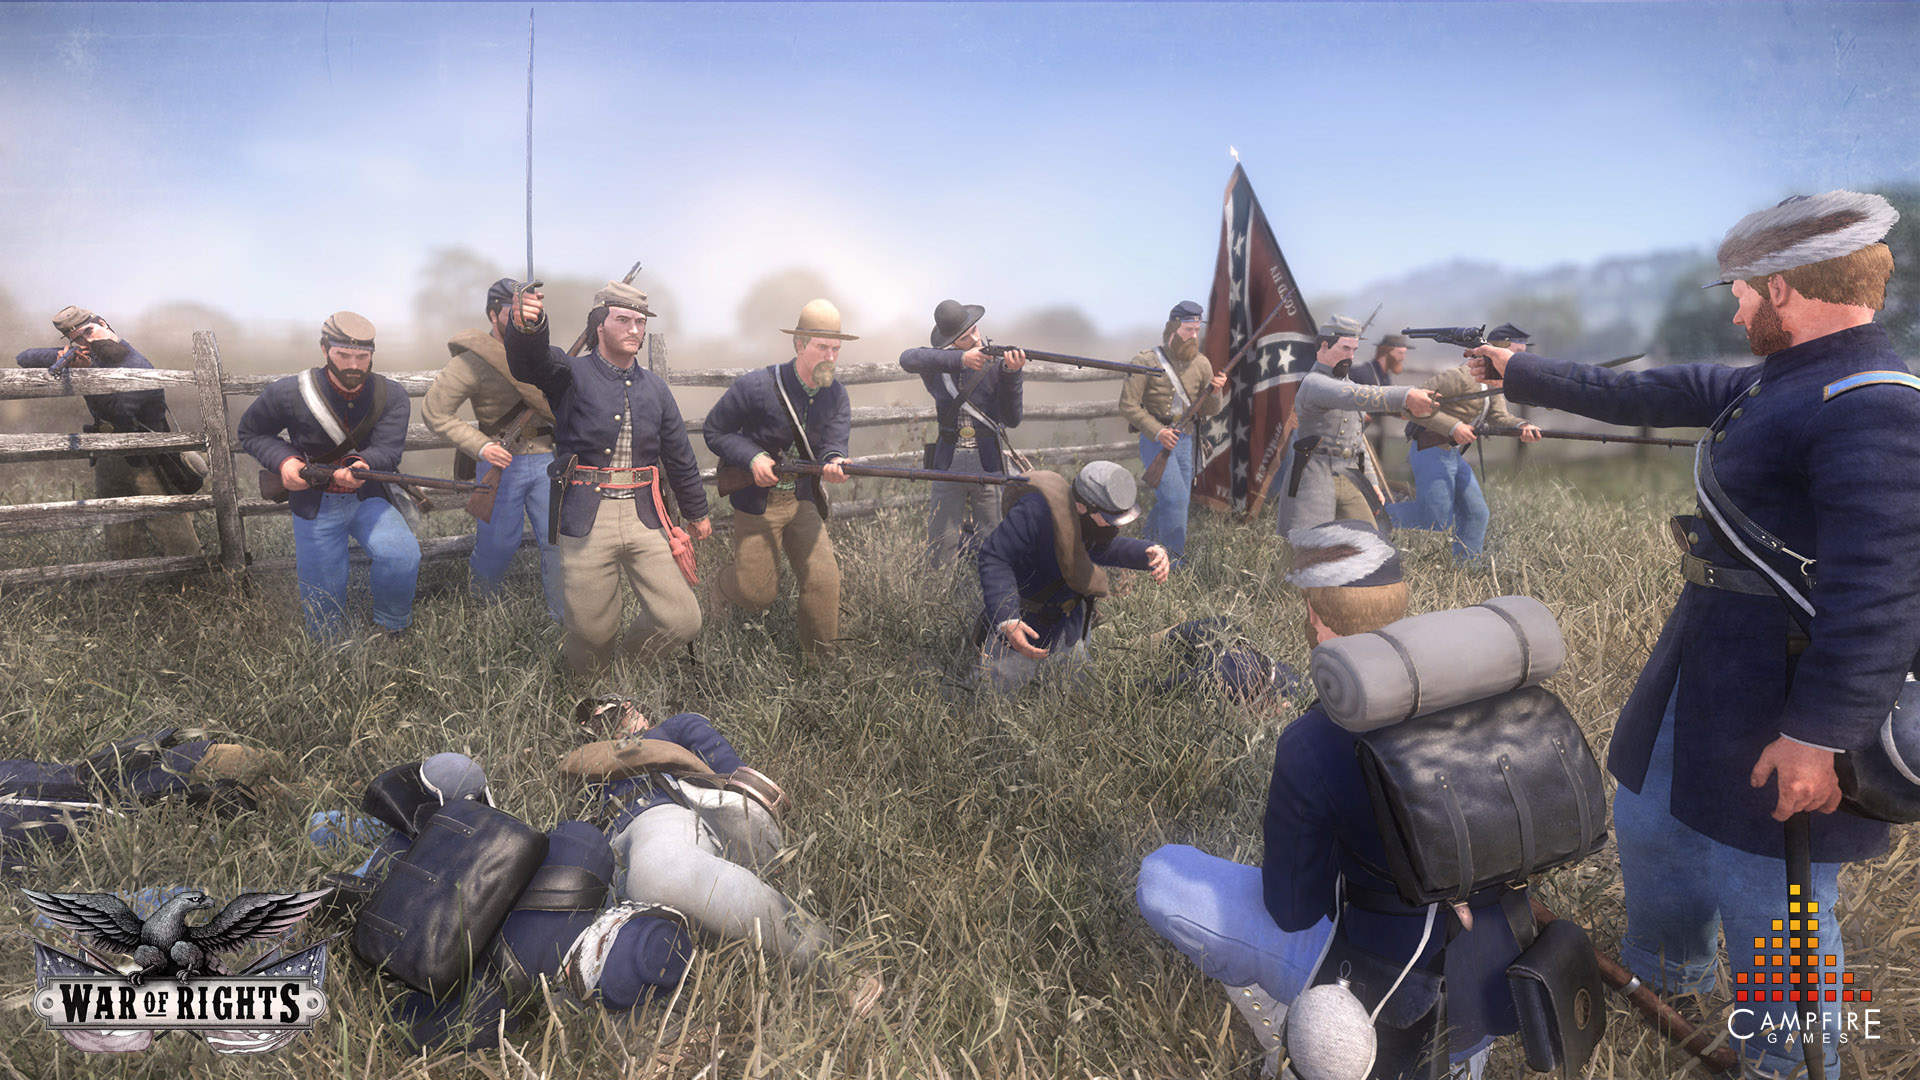 war of rights game